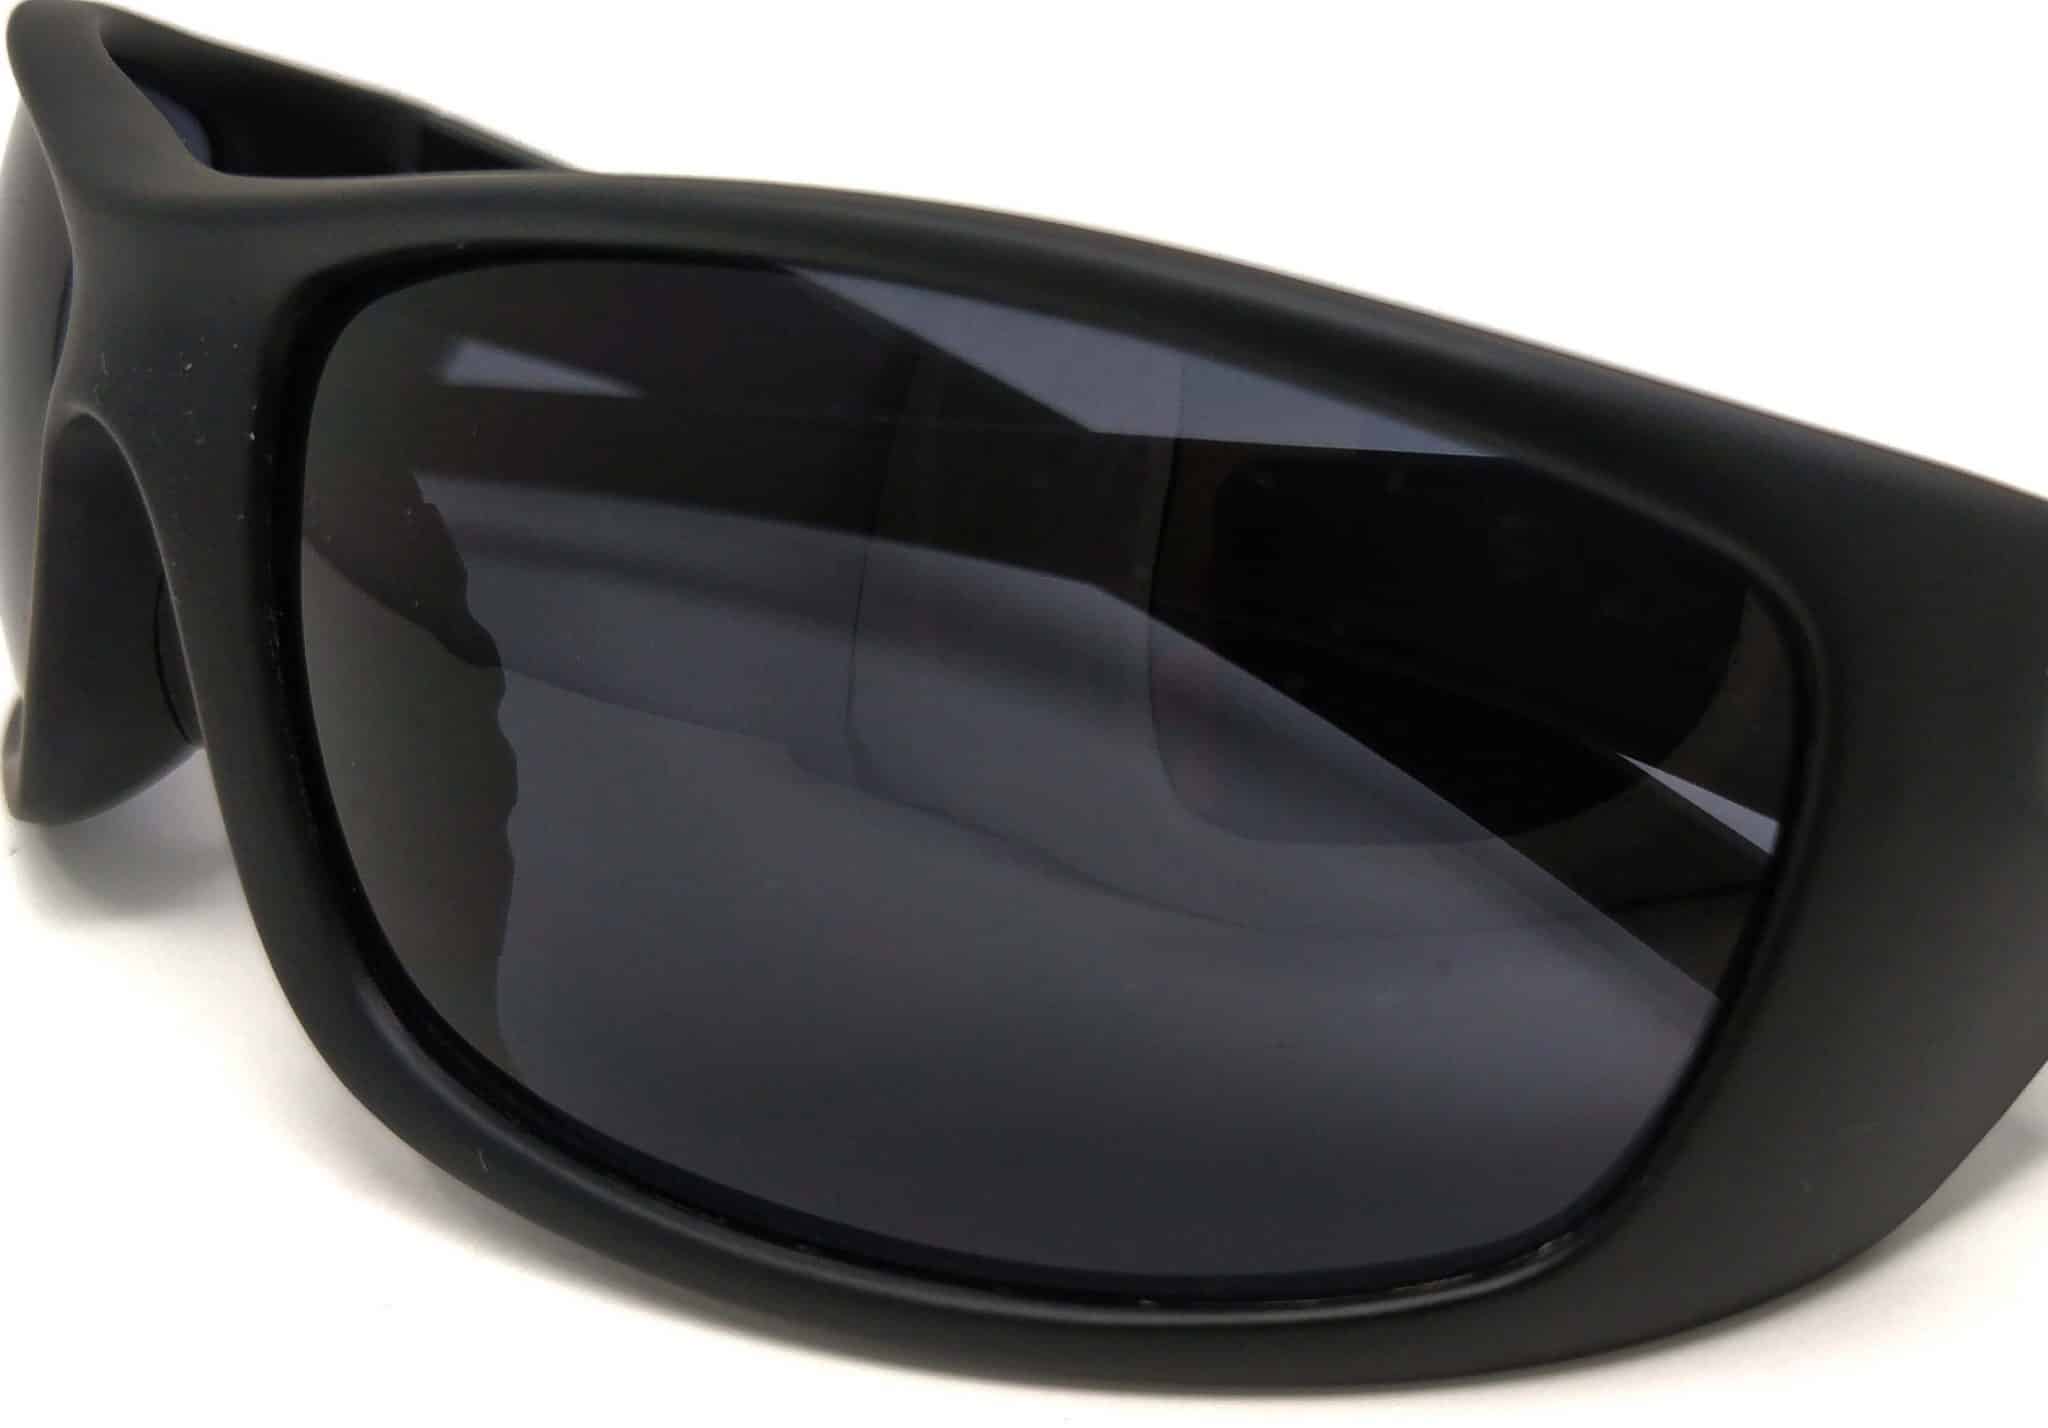 KIRO Sun Glasses / Shooting Glasses for Tactical and Everyday Use ...